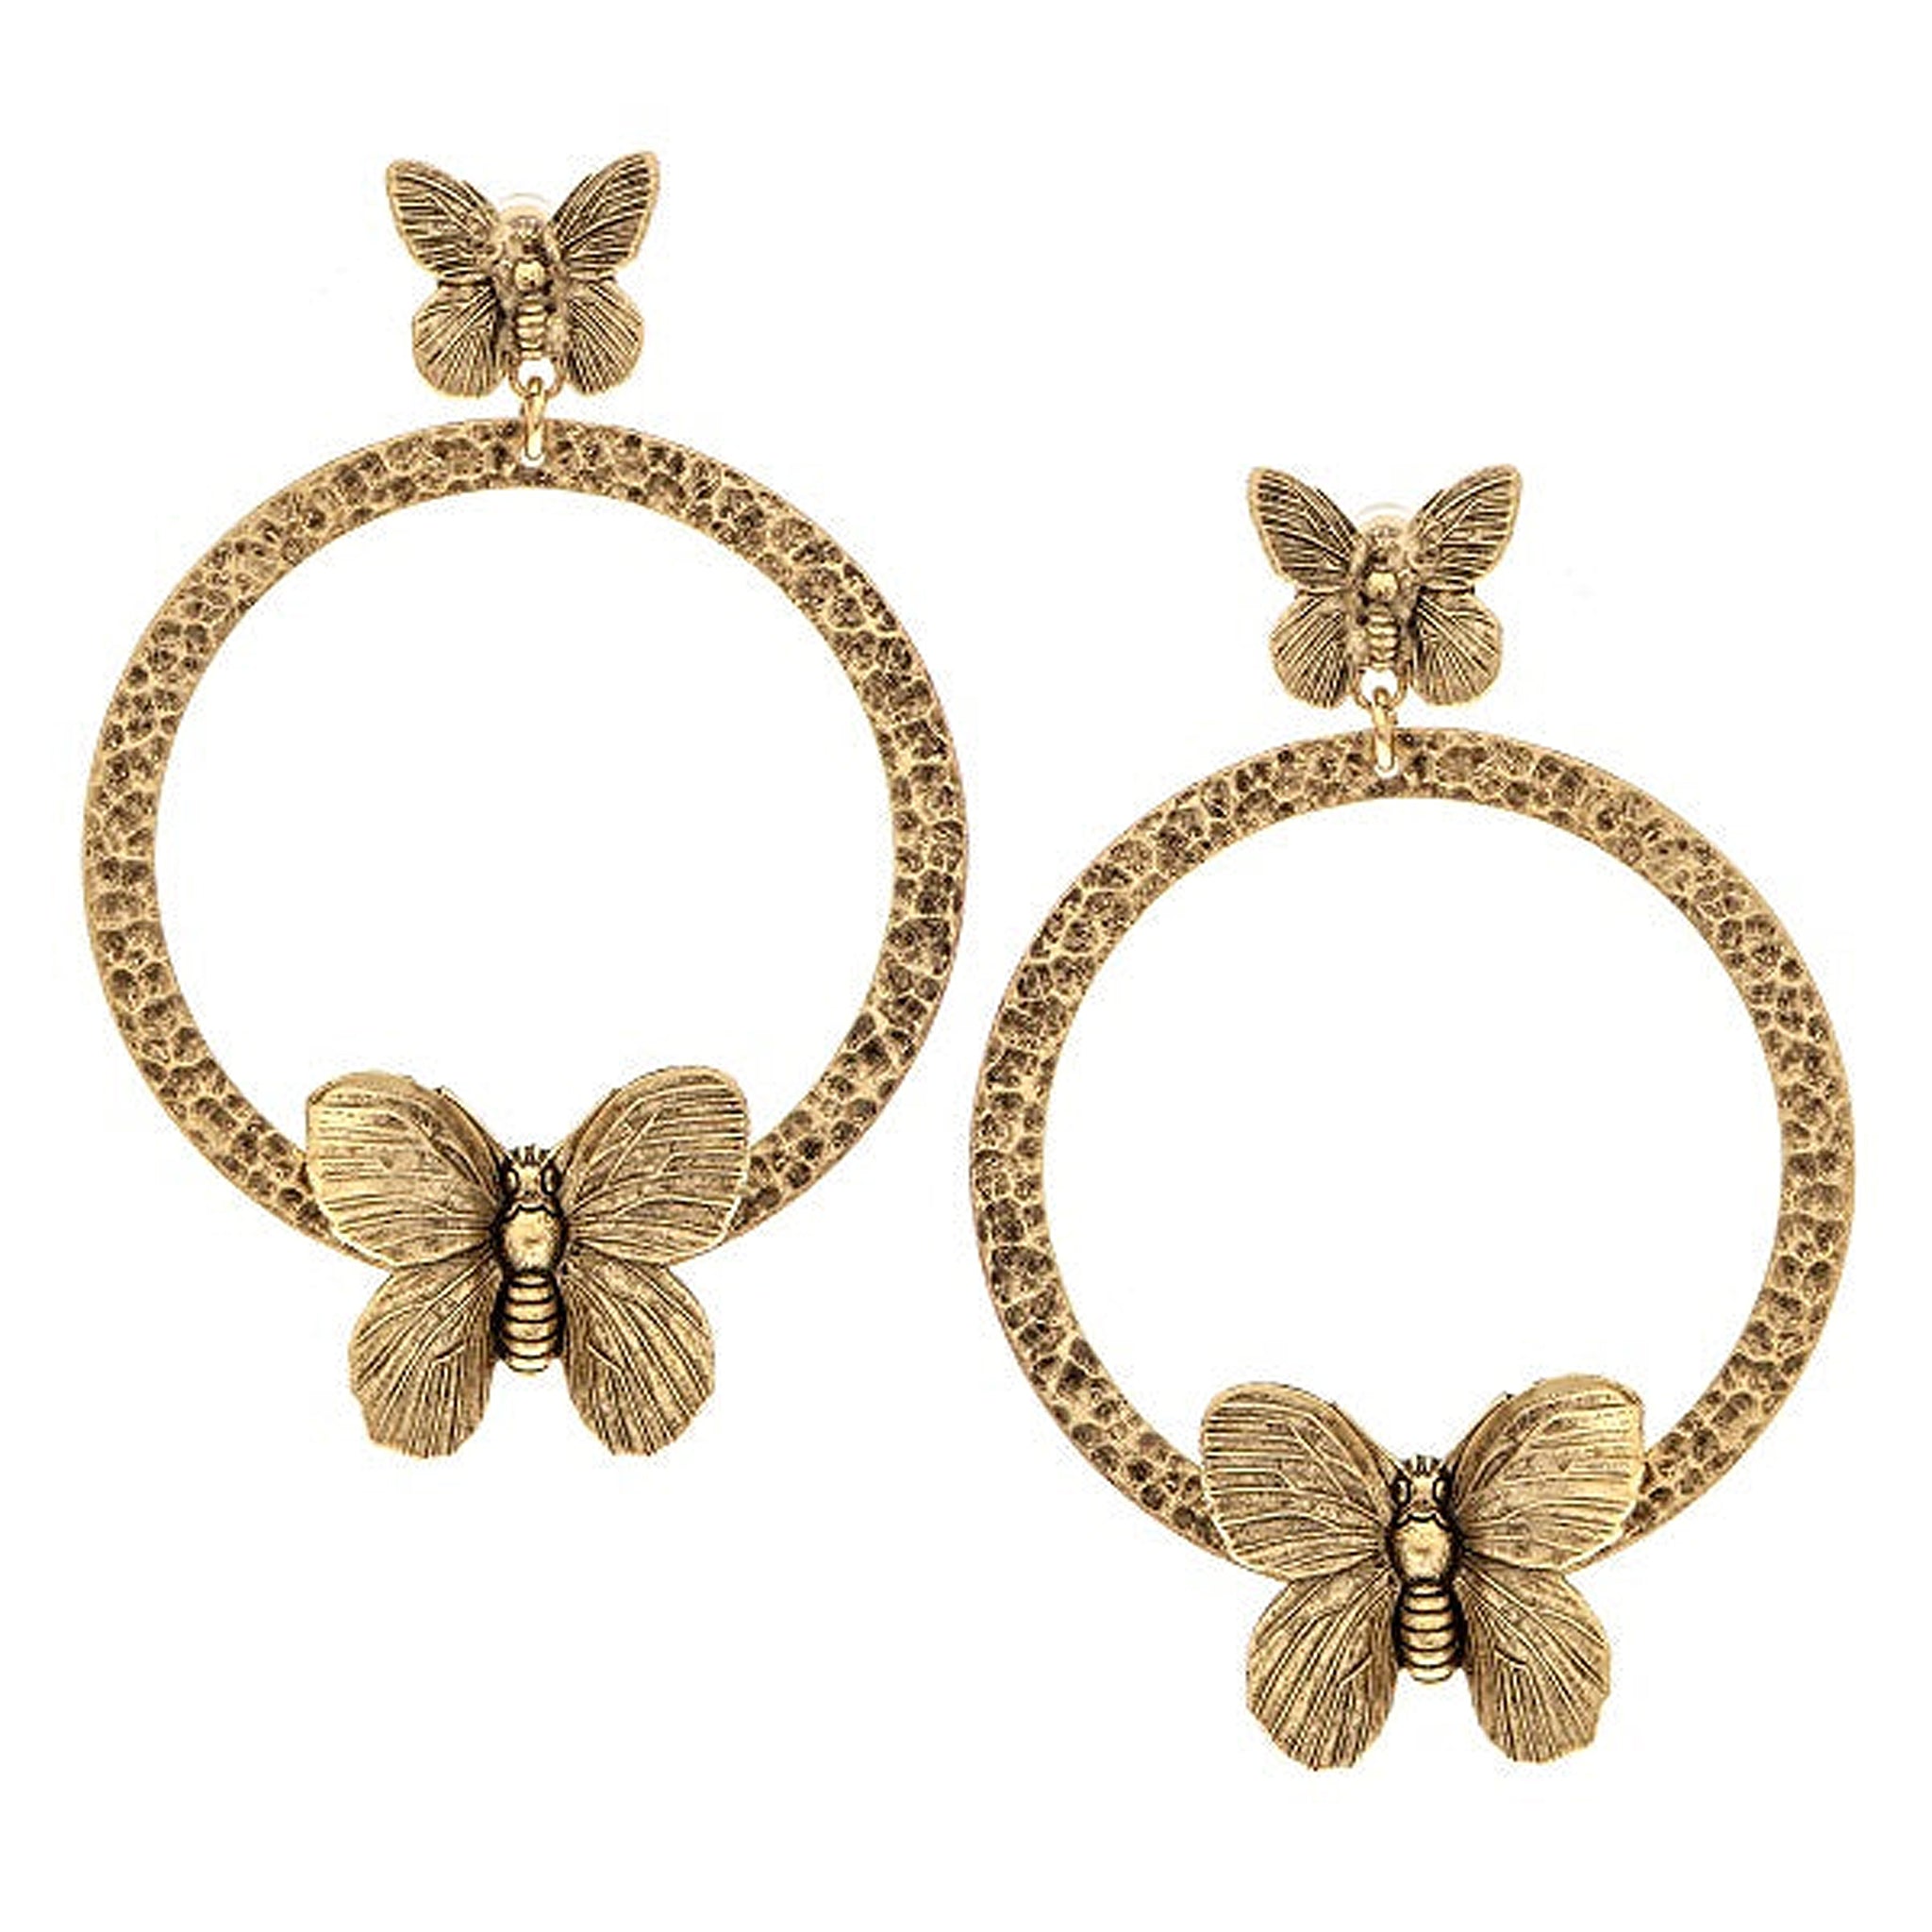 Yochi NY Allegra Butterfly Statement Thick Textured Hoop Earrings in 22k Gold